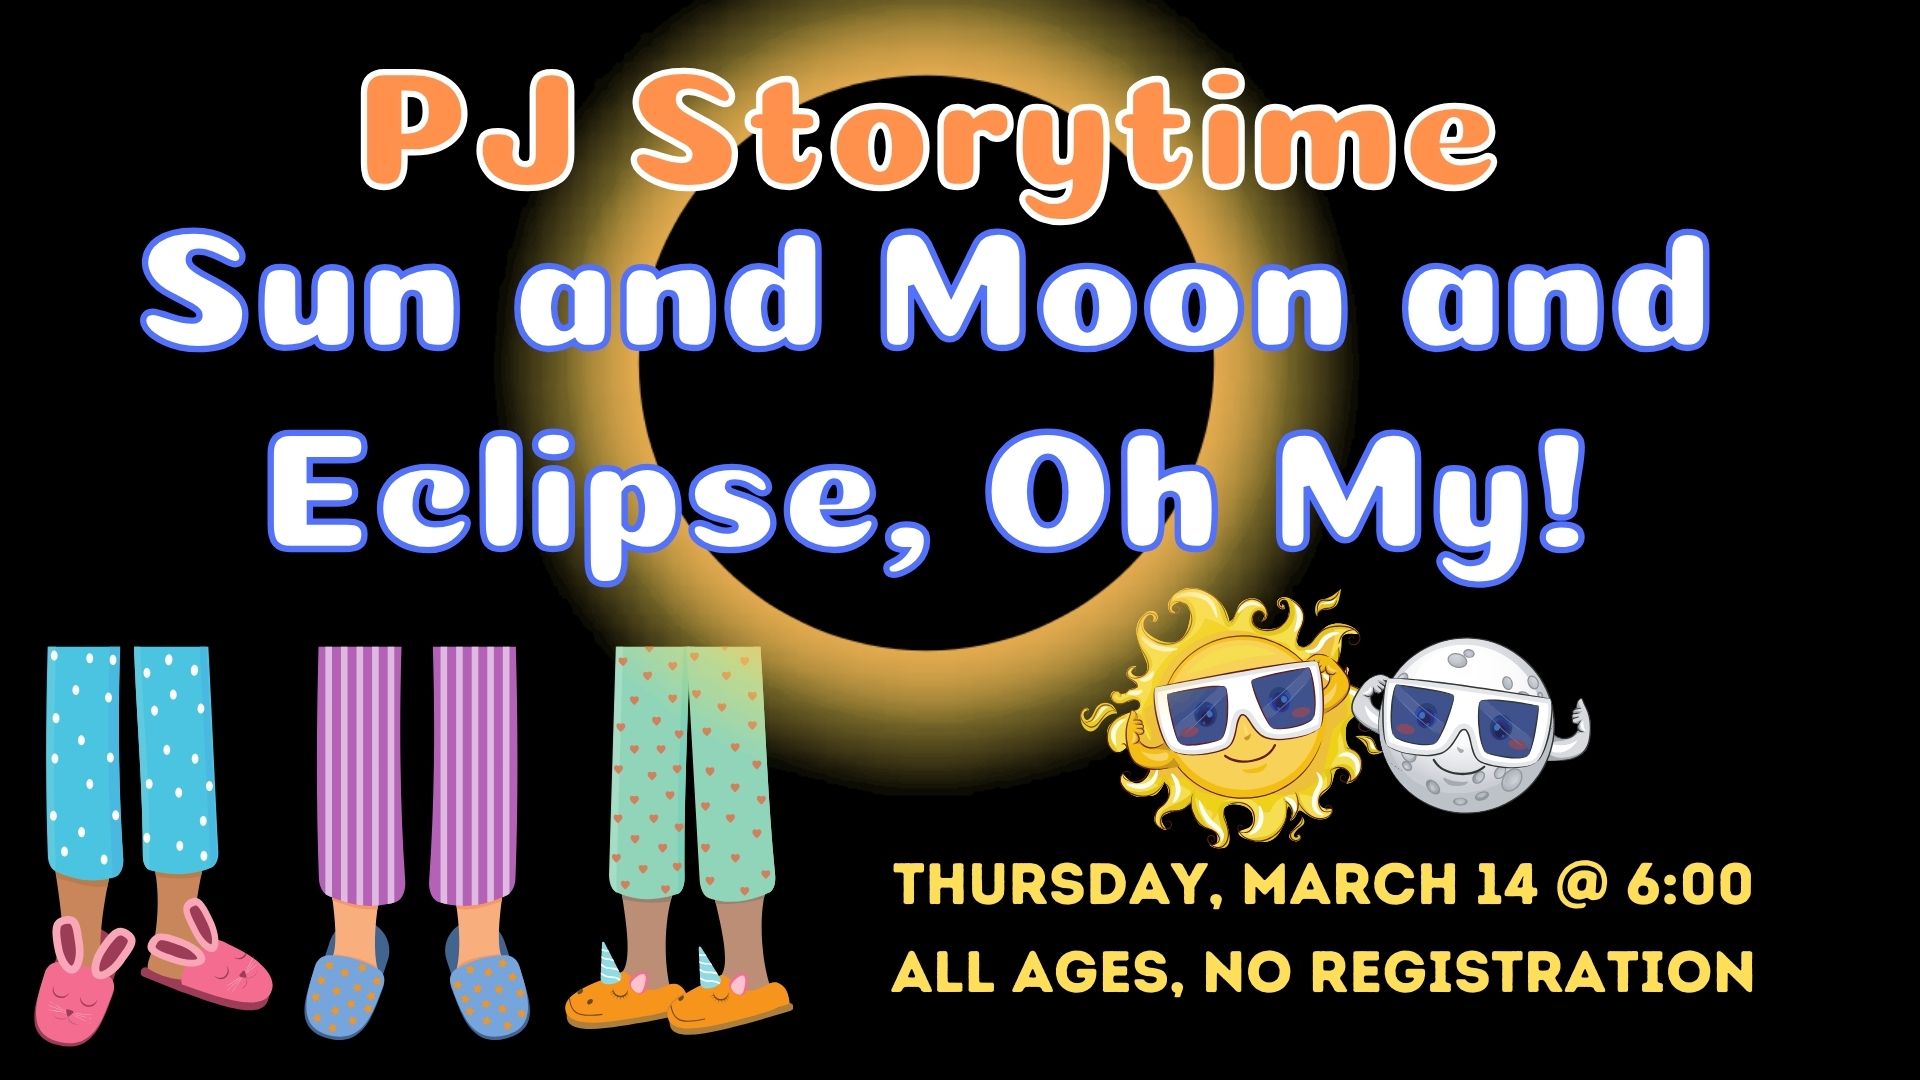 Image of legs wearing pajamas and bedtime slippers next to a full eclipse background and two small pictures of smiling sun and moon with eclipse glasses on.  Text reads PJ Storytime Sun and Moon and Eclipse, Oh My! Thursday, March 14 @ 6:00 pm